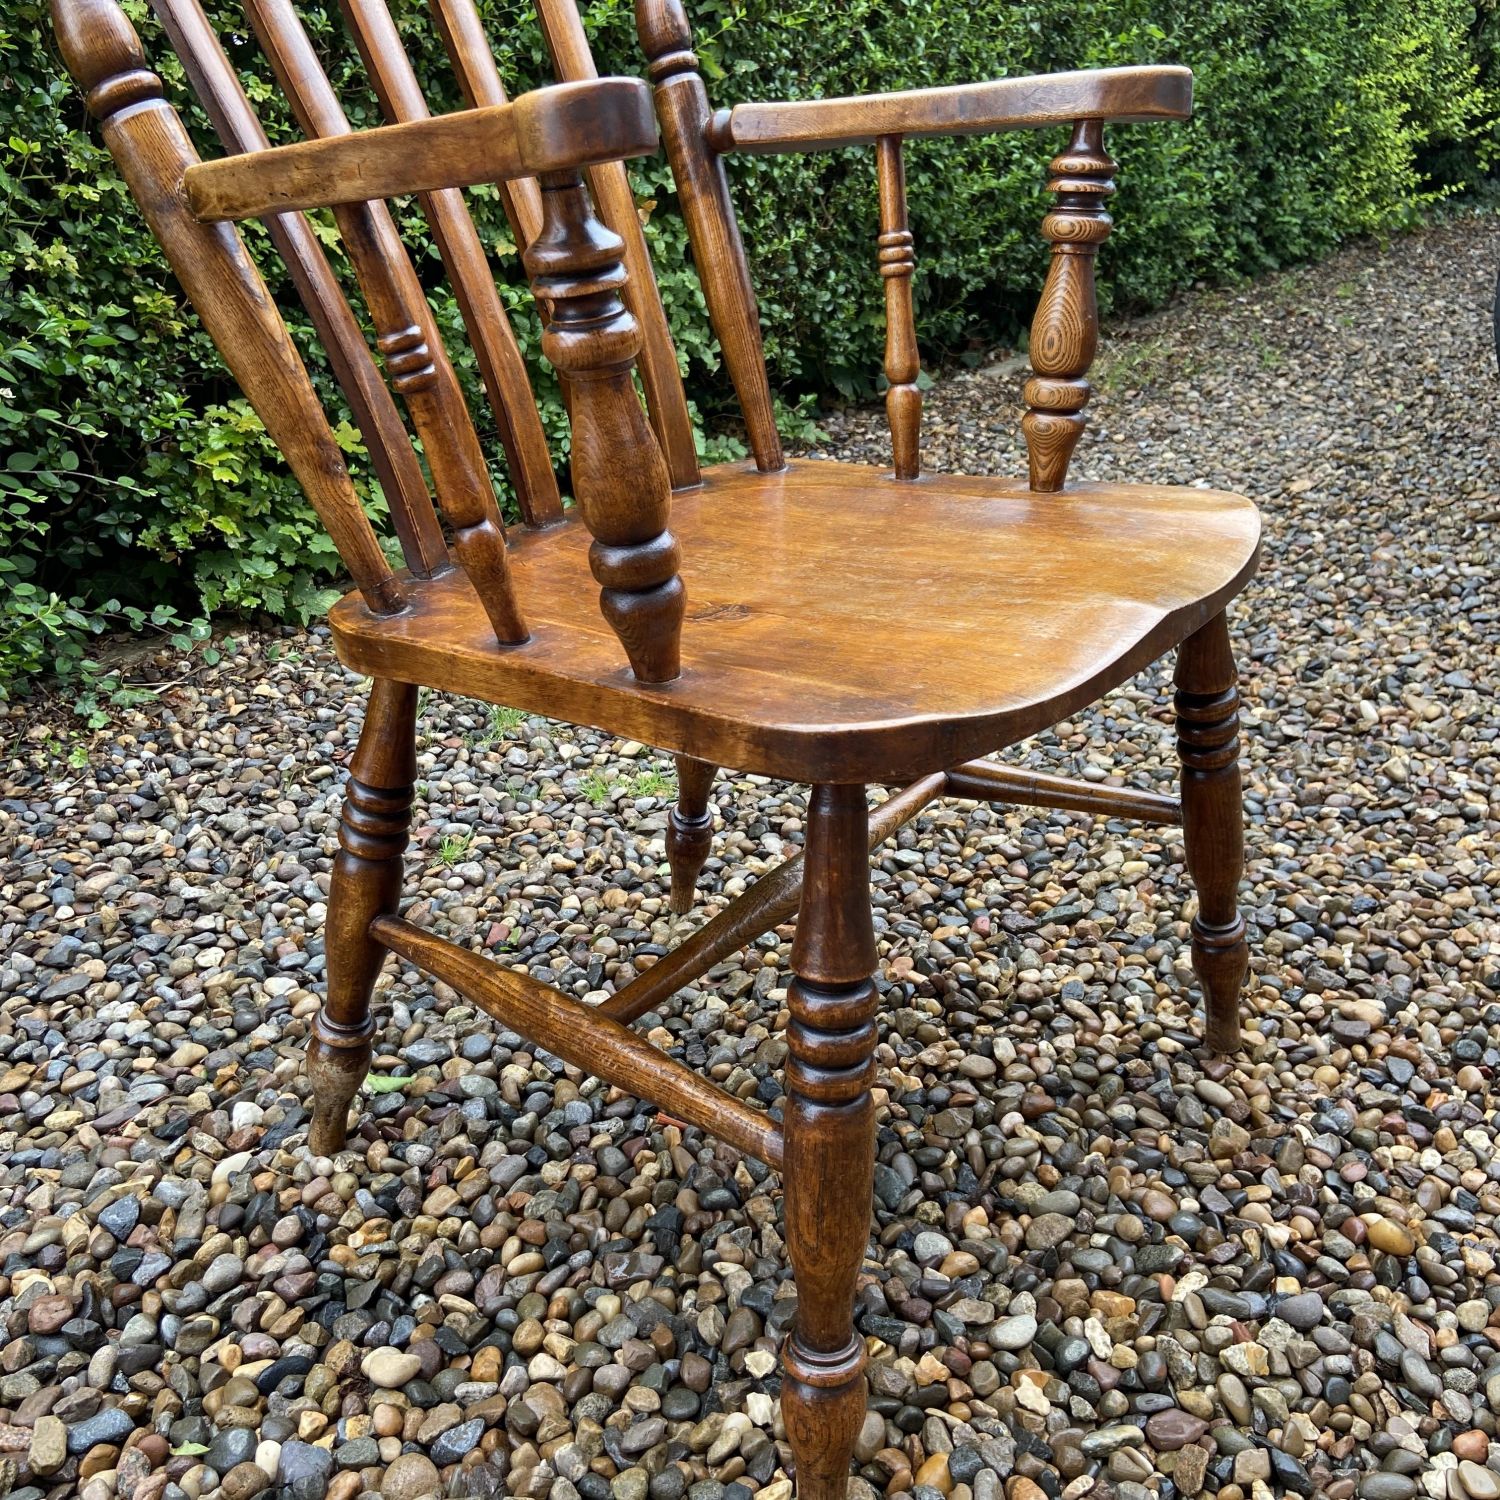 Victorian slat back kitchen chair - Antique Chairs - Hemswell Antique ...